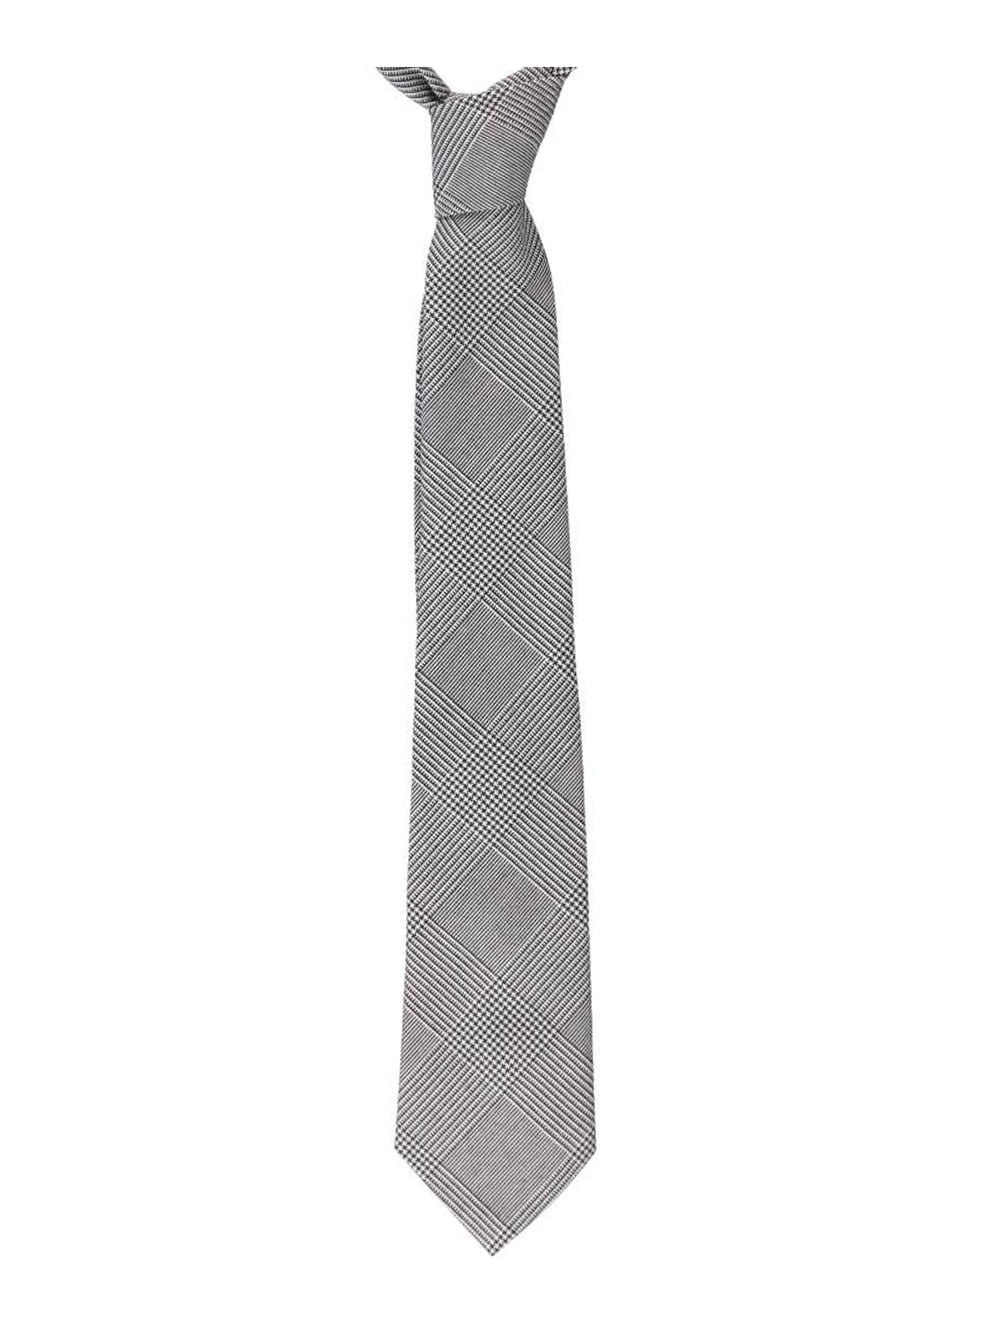 Cookie's Brand Traditional 4-in-Hand Necktie 